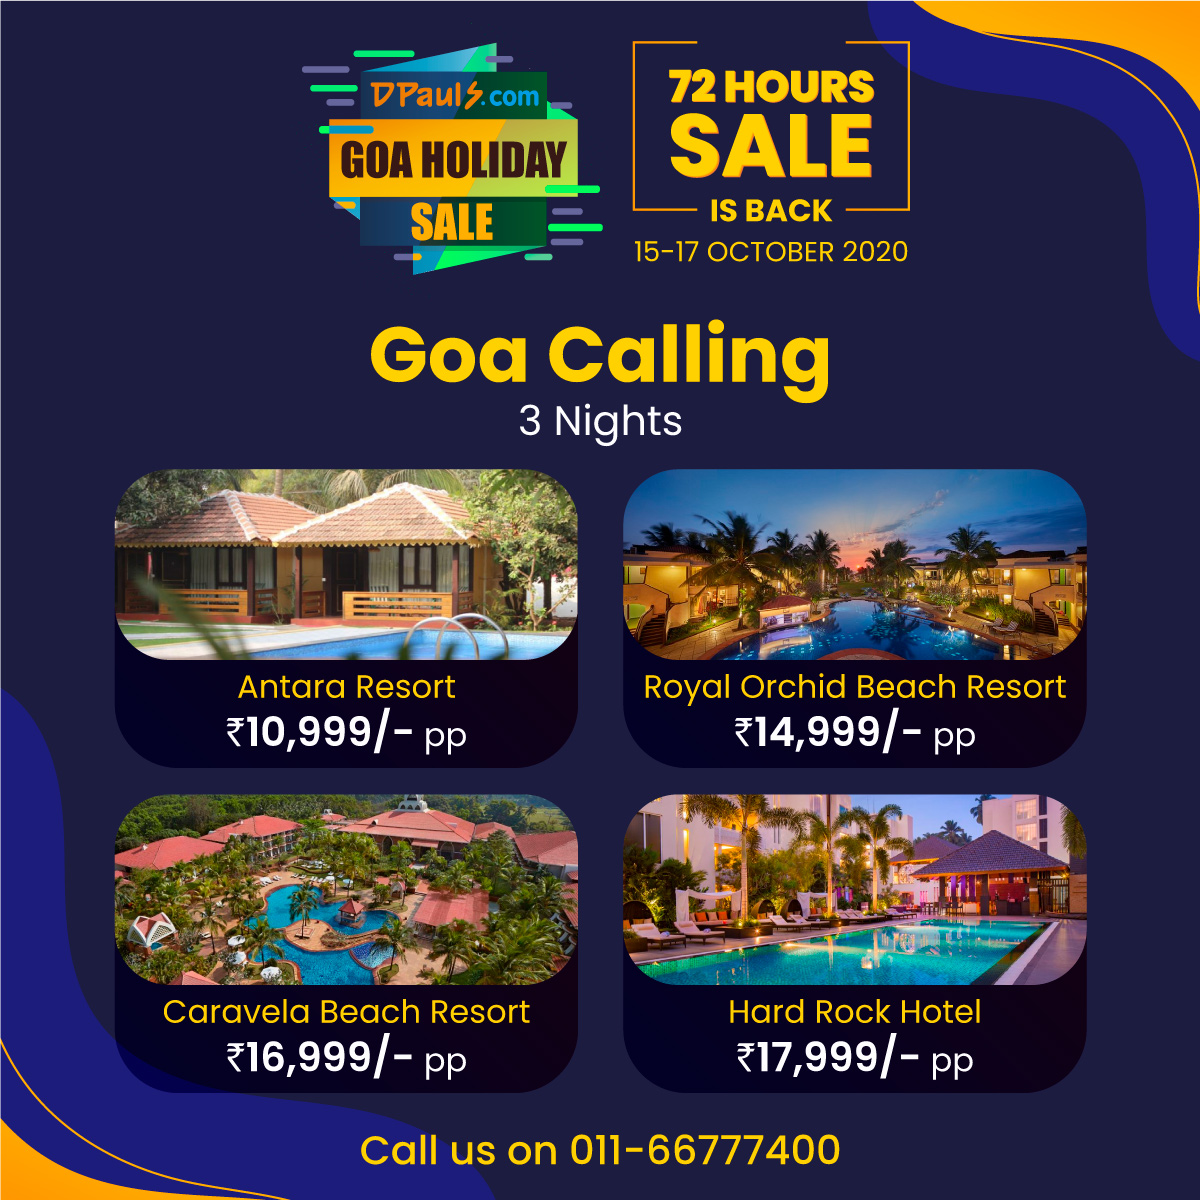 #DPauls_Travel #GoaHolidaySale 
72 Hrs Sale!
Plan a Trip to Goa! Packages start from Rs.10999/-😍 with Airfare.
Book Now bit.ly/2OKrOsB OR Call us on 011-66777400
Sale Period:- 15 - 17 Oct 2020
#Goa #TriptoGoa #GoaDeal #Sale #weekend #weekendgetaway #72hrsSale